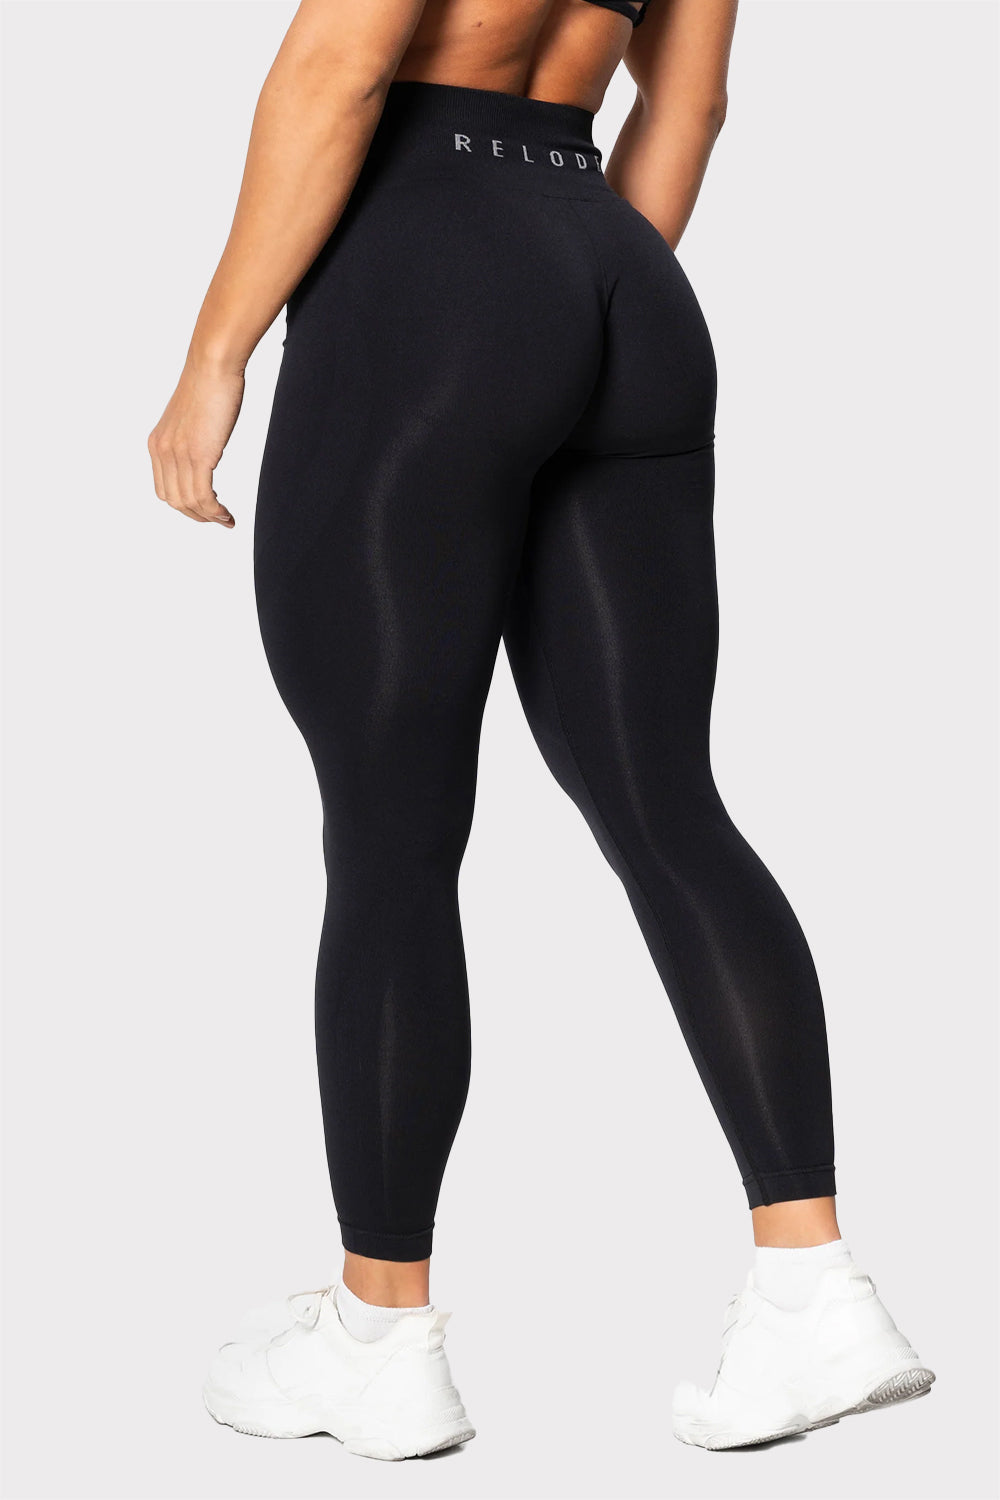 R Prime Seamless Tights - FEKETE